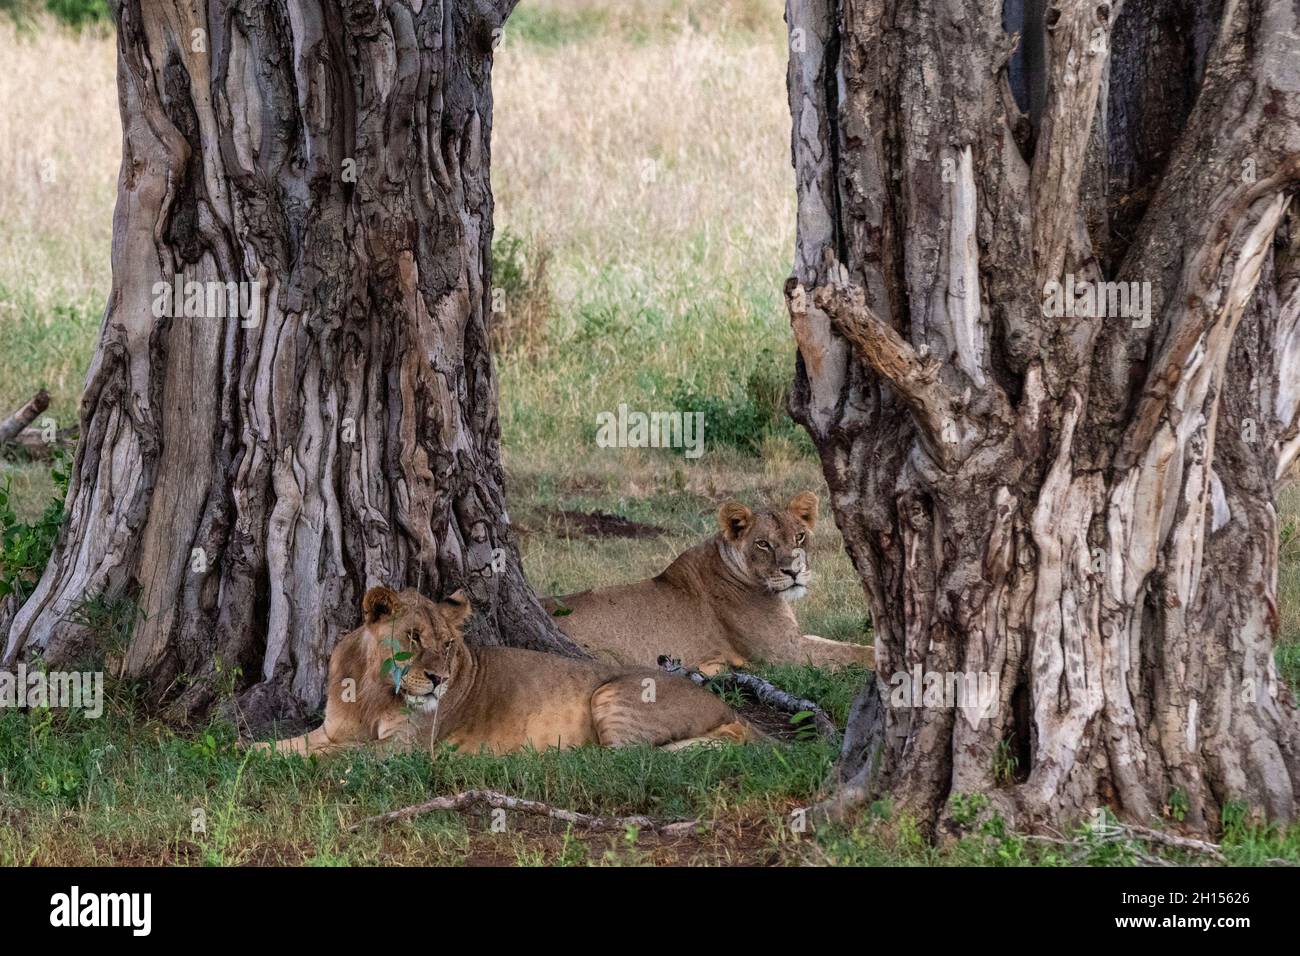 A lion and a lioness, Panthera leo, resting. Voi, Tsavo Conservation Area, Kenya. Stock Photo